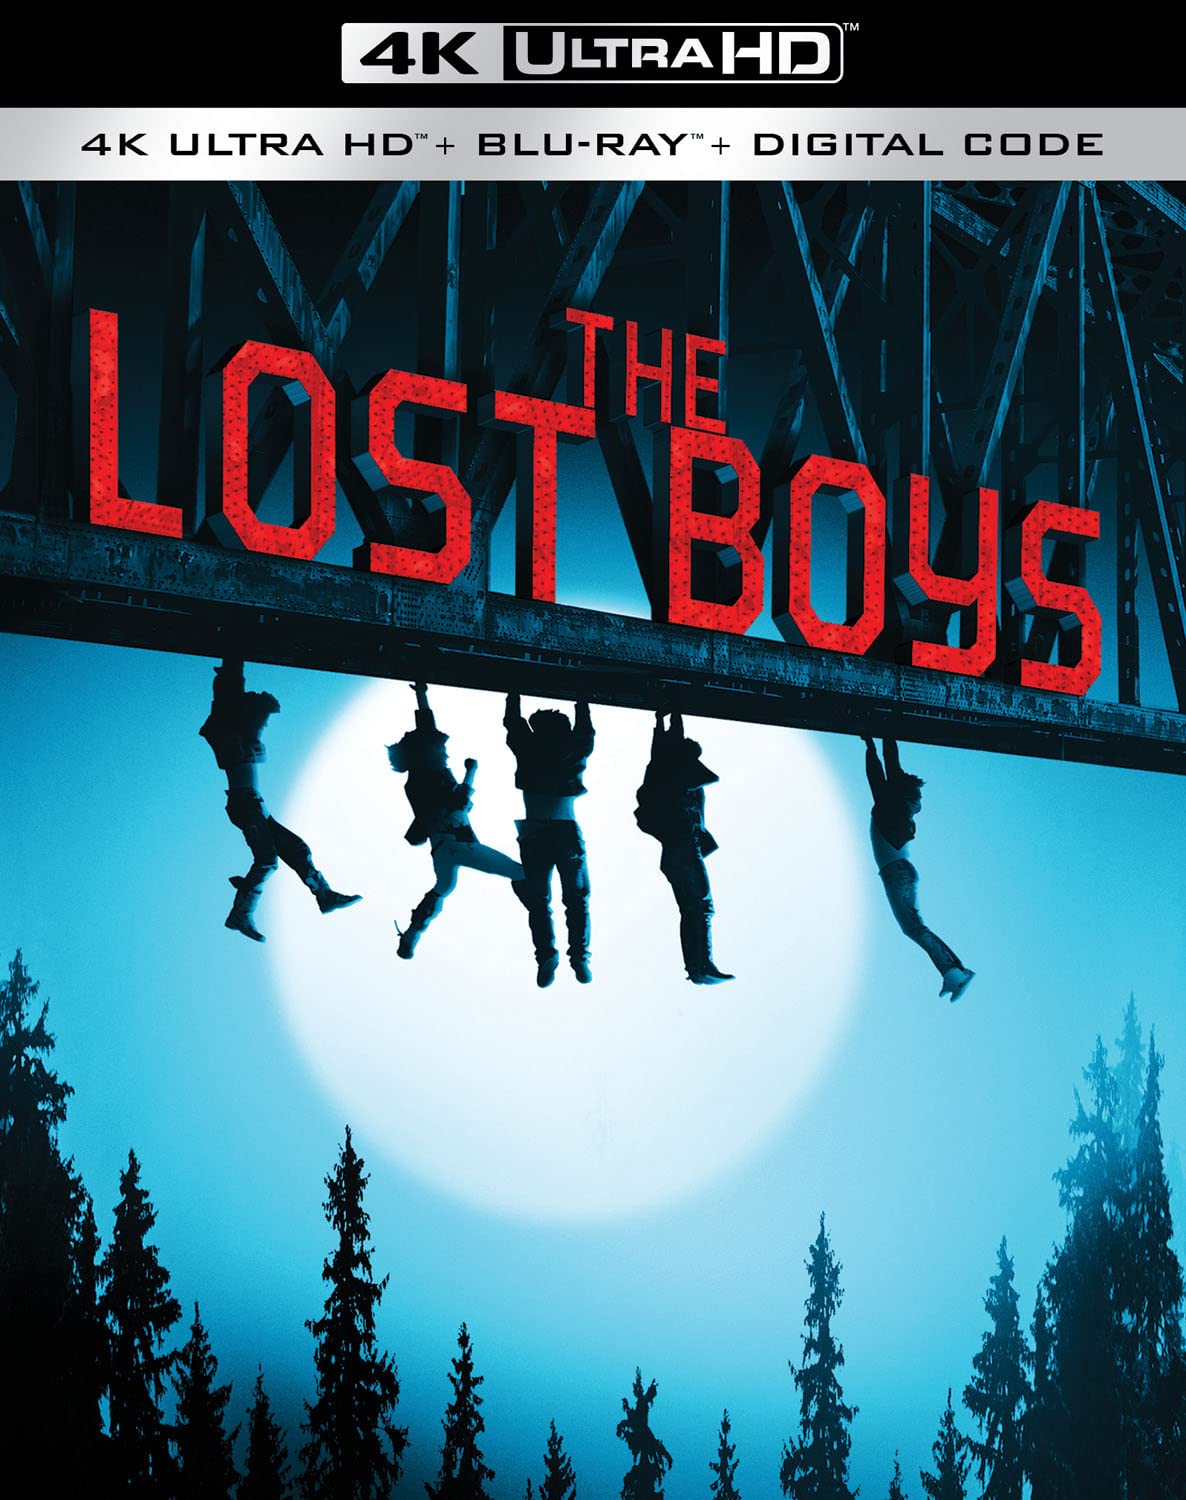 The Lost Boys 4k Blu-ray Combo